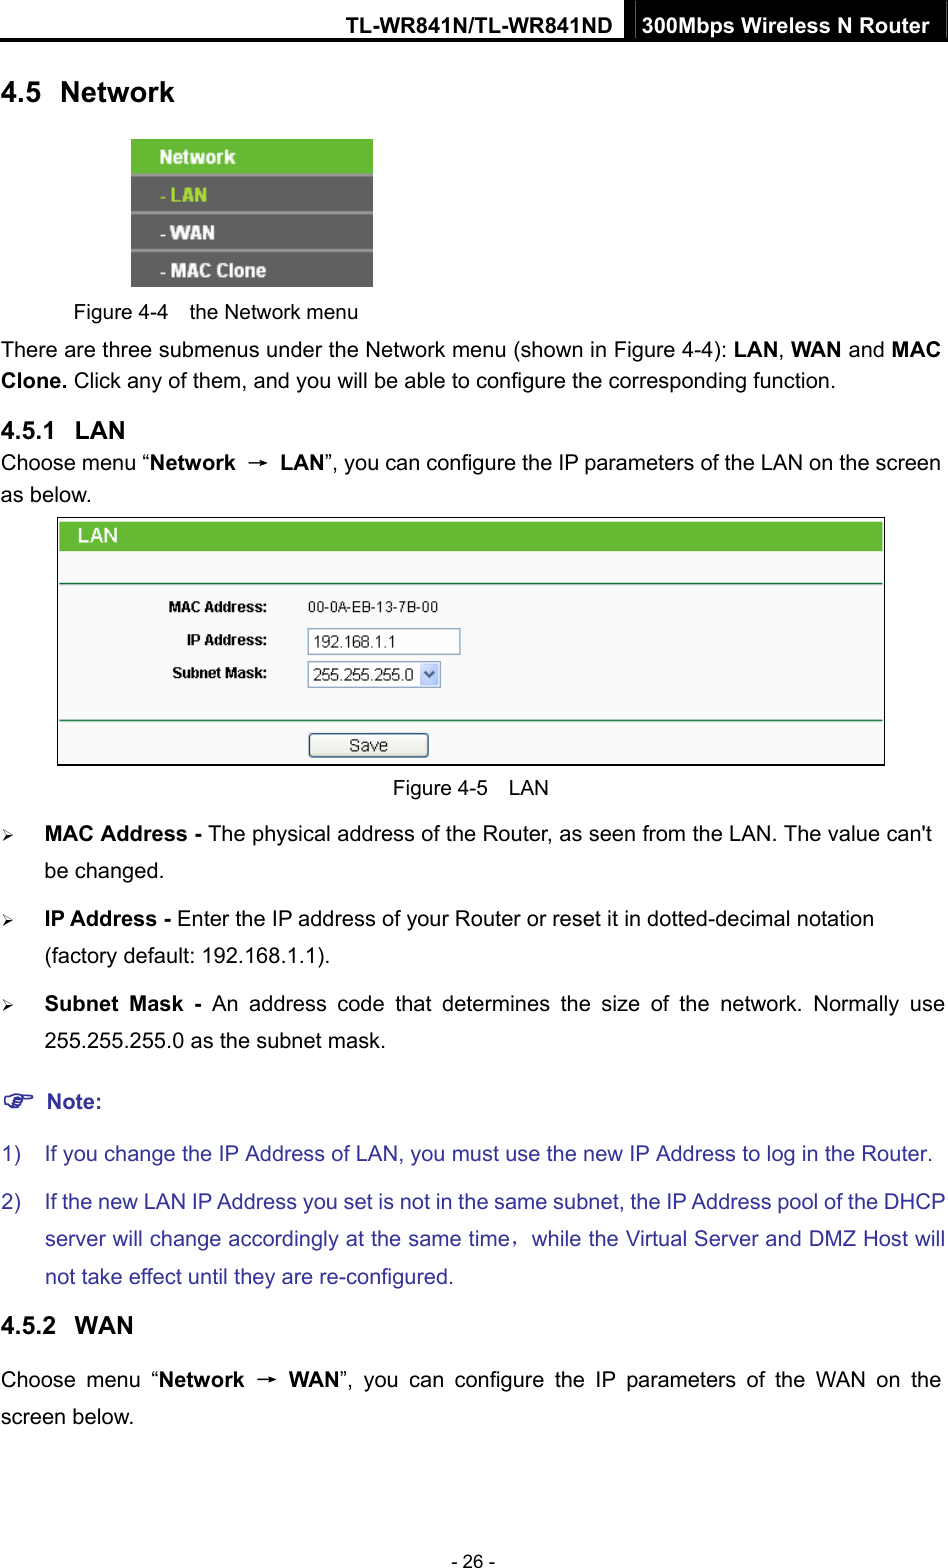 TL-WR841N/TL-WR841ND 300Mbps Wireless N Router - 26 - 4.5  Network  Figure 4-4  the Network menu There are three submenus under the Network menu (shown in Figure 4-4): LAN, WAN and MAC Clone. Click any of them, and you will be able to configure the corresponding function.   4.5.1  LAN Choose menu “Network  → LAN”, you can configure the IP parameters of the LAN on the screen as below.  Figure 4-5  LAN ¾ MAC Address - The physical address of the Router, as seen from the LAN. The value can&apos;t be changed. ¾ IP Address - Enter the IP address of your Router or reset it in dotted-decimal notation (factory default: 192.168.1.1). ¾ Subnet Mask - An address code that determines the size of the network. Normally use 255.255.255.0 as the subnet mask.   ) Note: 1)  If you change the IP Address of LAN, you must use the new IP Address to log in the Router.   2)  If the new LAN IP Address you set is not in the same subnet, the IP Address pool of the DHCP server will change accordingly at the same time，while the Virtual Server and DMZ Host will not take effect until they are re-configured. 4.5.2  WAN Choose menu “Network  → WAN”, you can configure the IP parameters of the WAN on the screen below. 